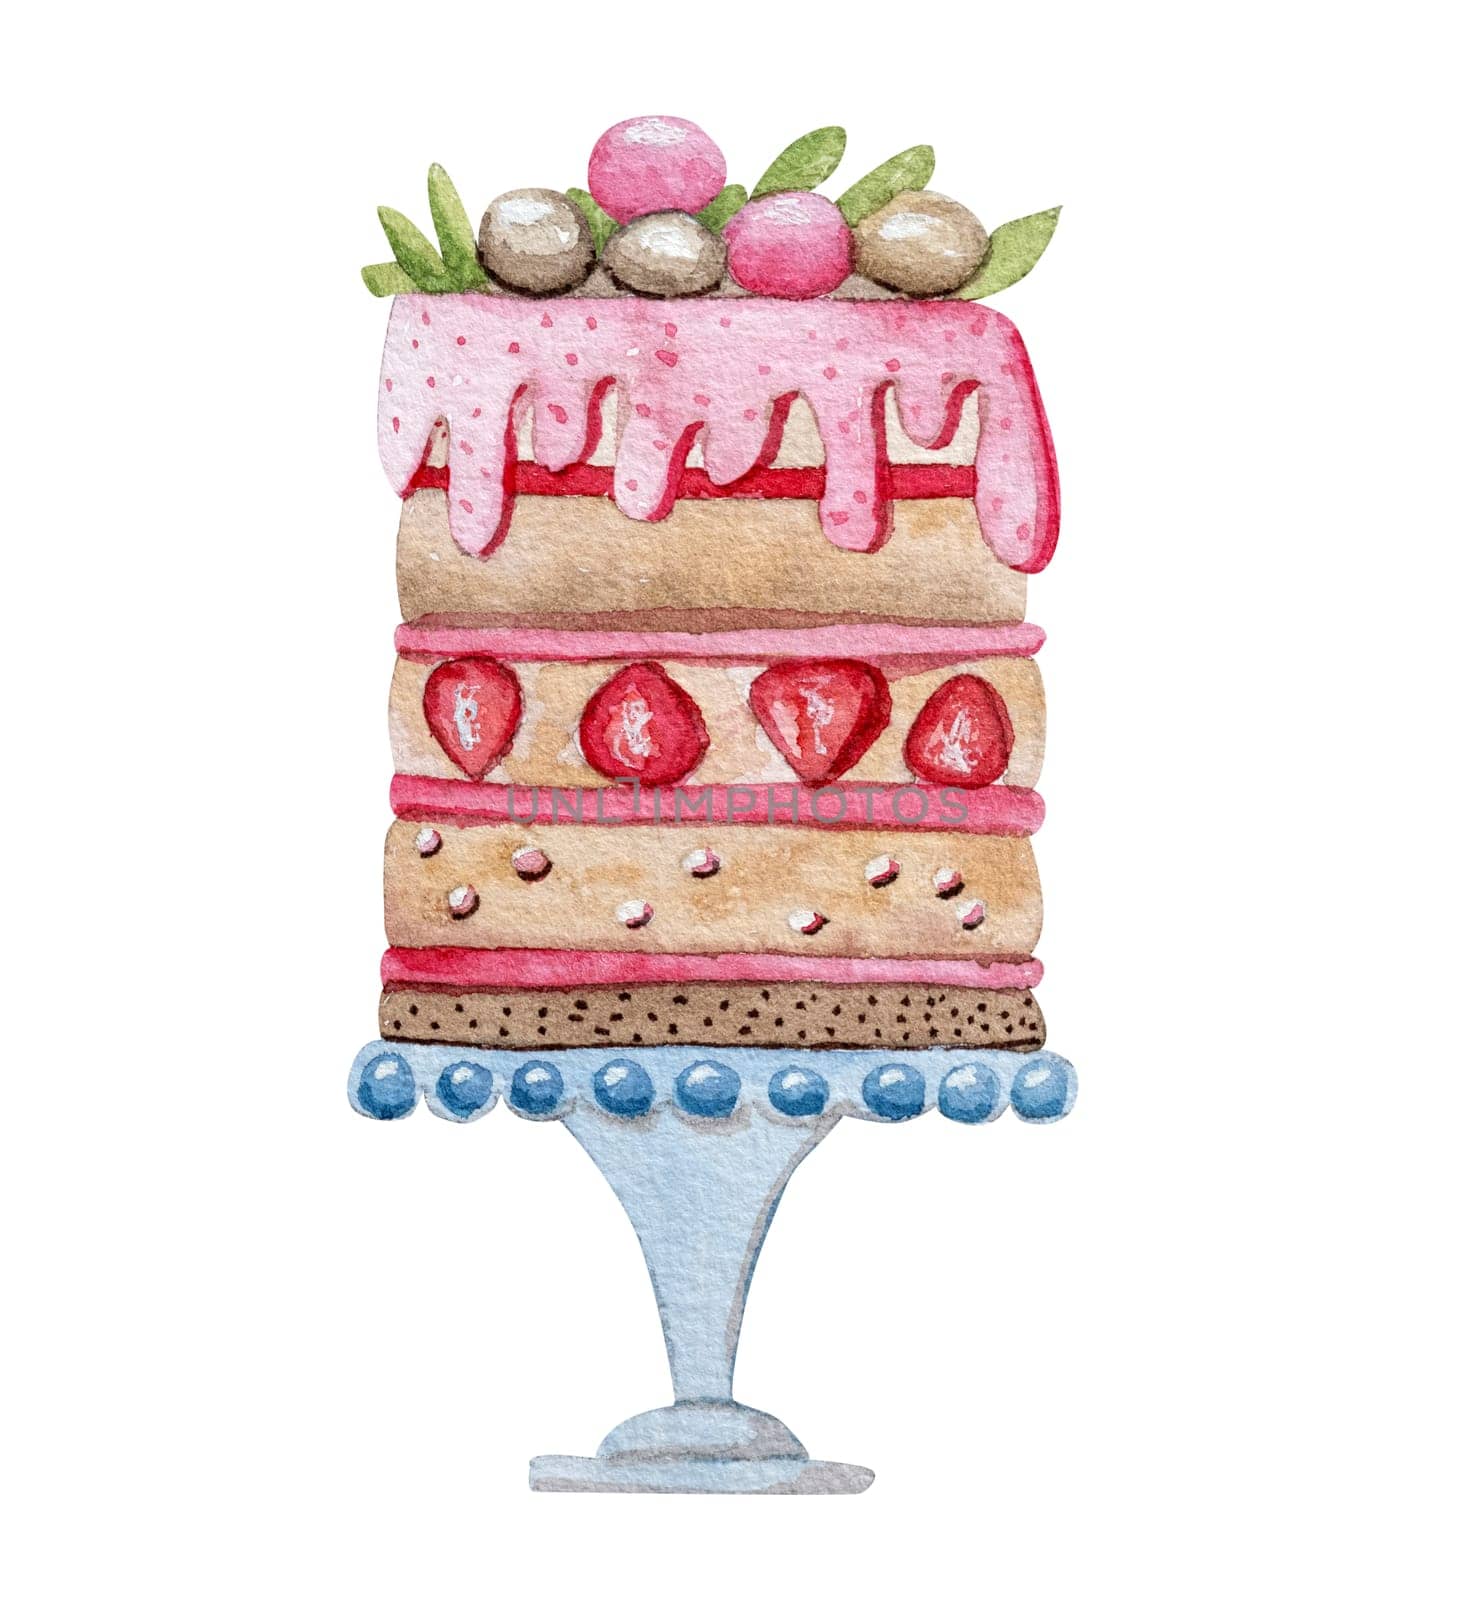 Hand-Drawn Watercolor Illustration Of A Festive Cake For A Birthday, Valentine'S Day, Or Another Holiday